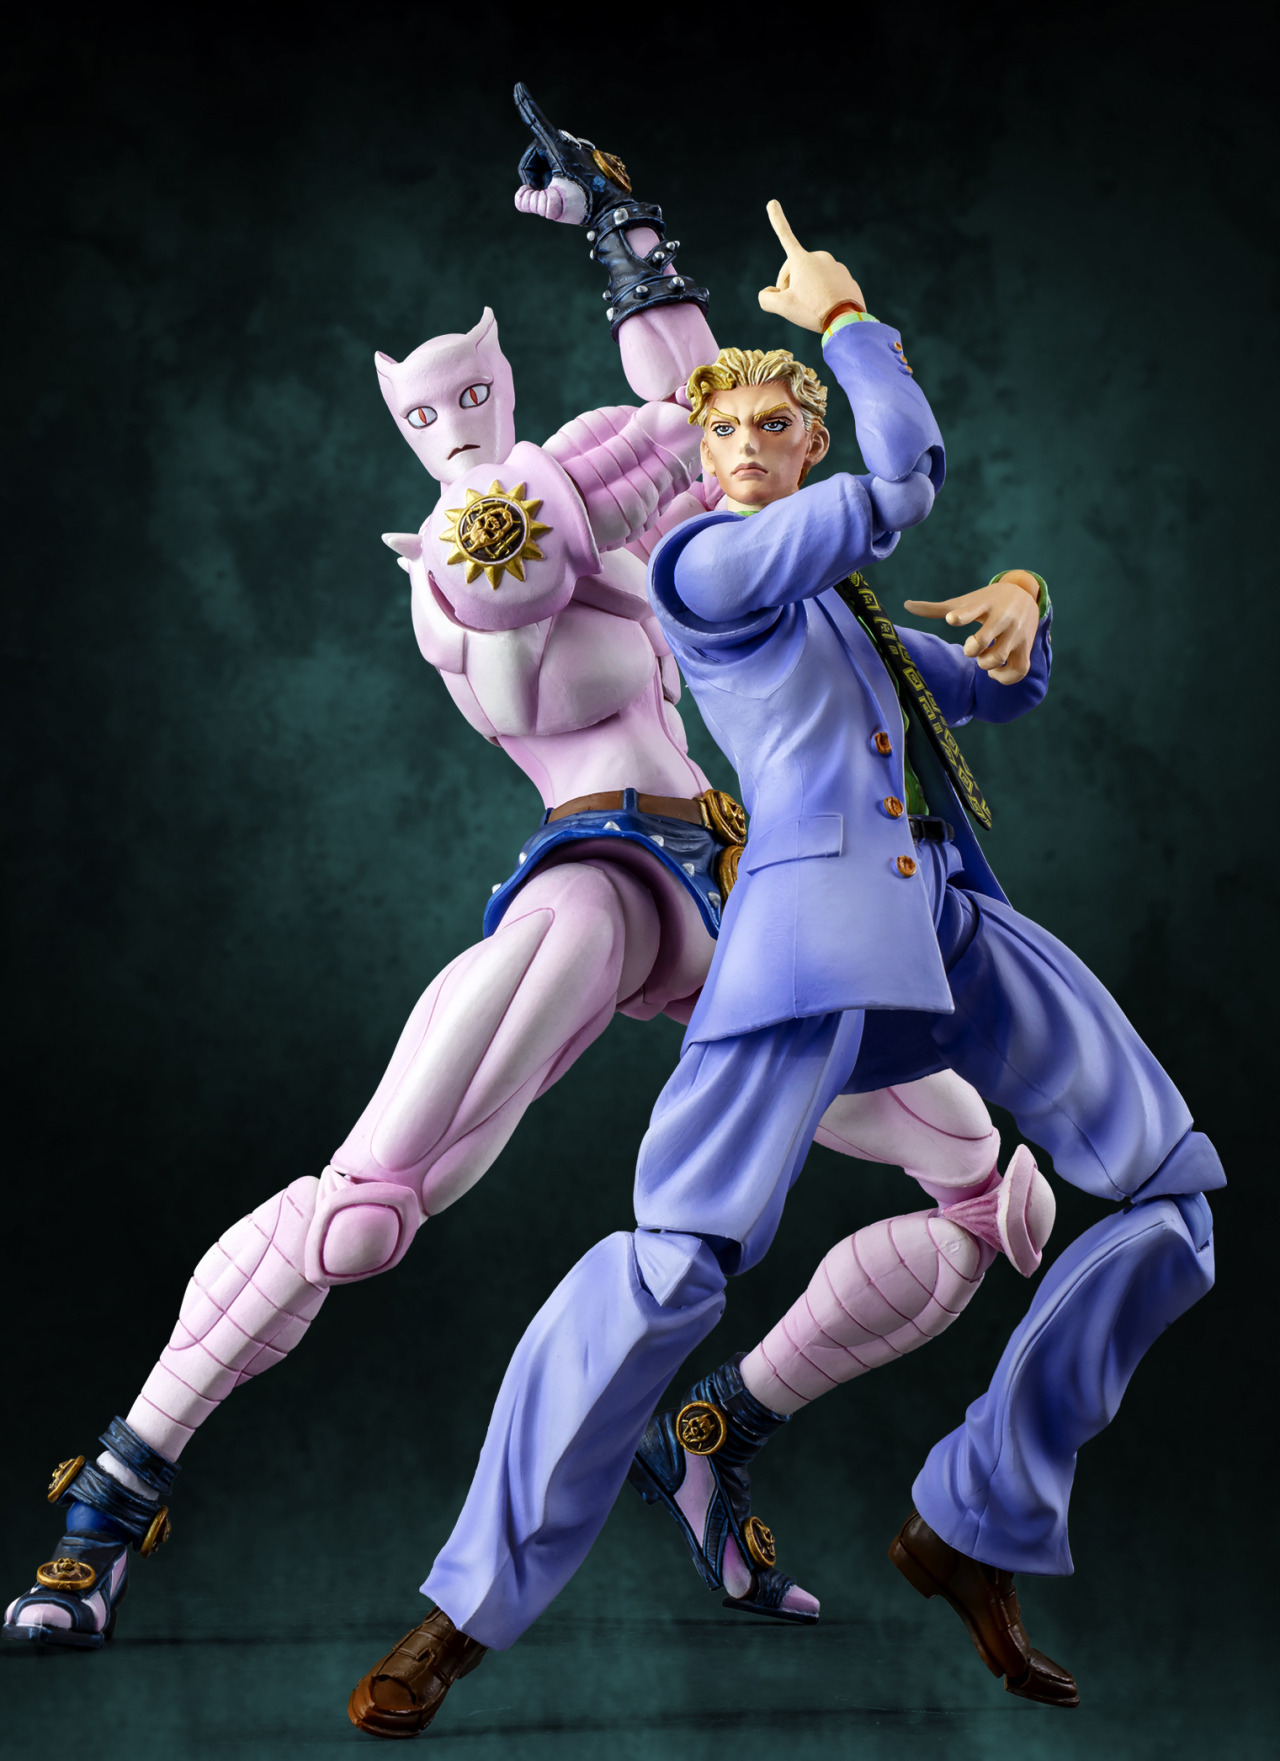 PURPLE KIRA AND PINK KILLER QUEEN (and Stray Cat) are both getting 2022 RE-RELEASES (if you collect these things you know that both originally came out in 2011 and never got re-issued). Pre-orders start in July. #jjba #jojos bizarre adventure  #diamond is unbreakable #kira yoshikage#jojo merch#mp#mfp#mj#figures#medicos #jojo no kimyou na bouken #jojo#killer queen